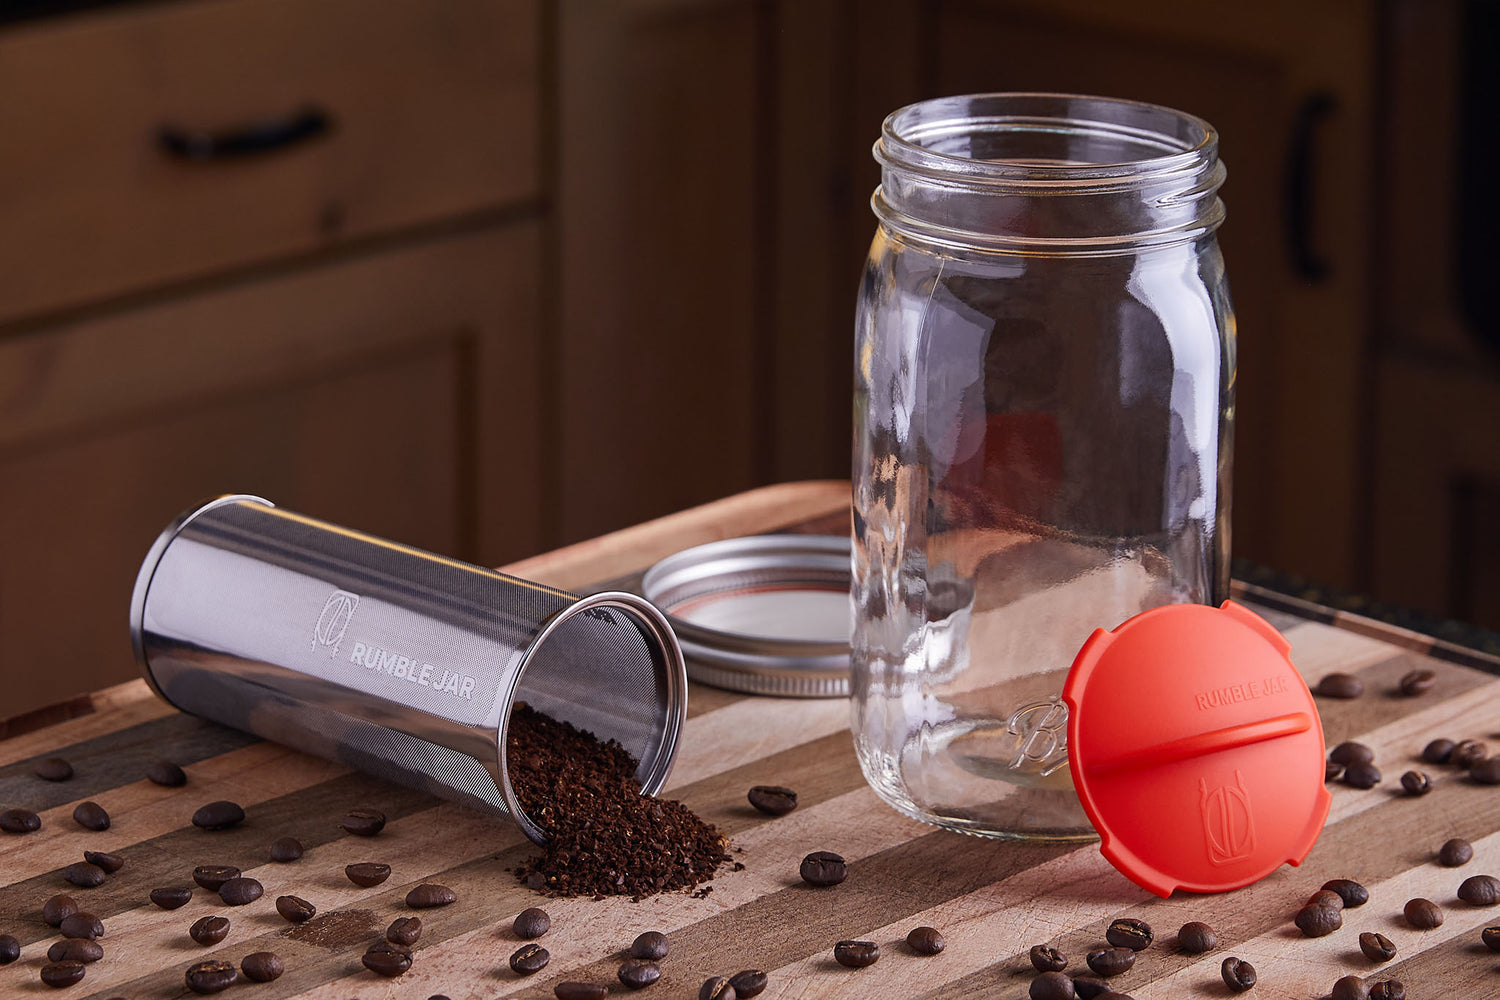 Rumble Jar  A Better Cold Brew Coffee Maker